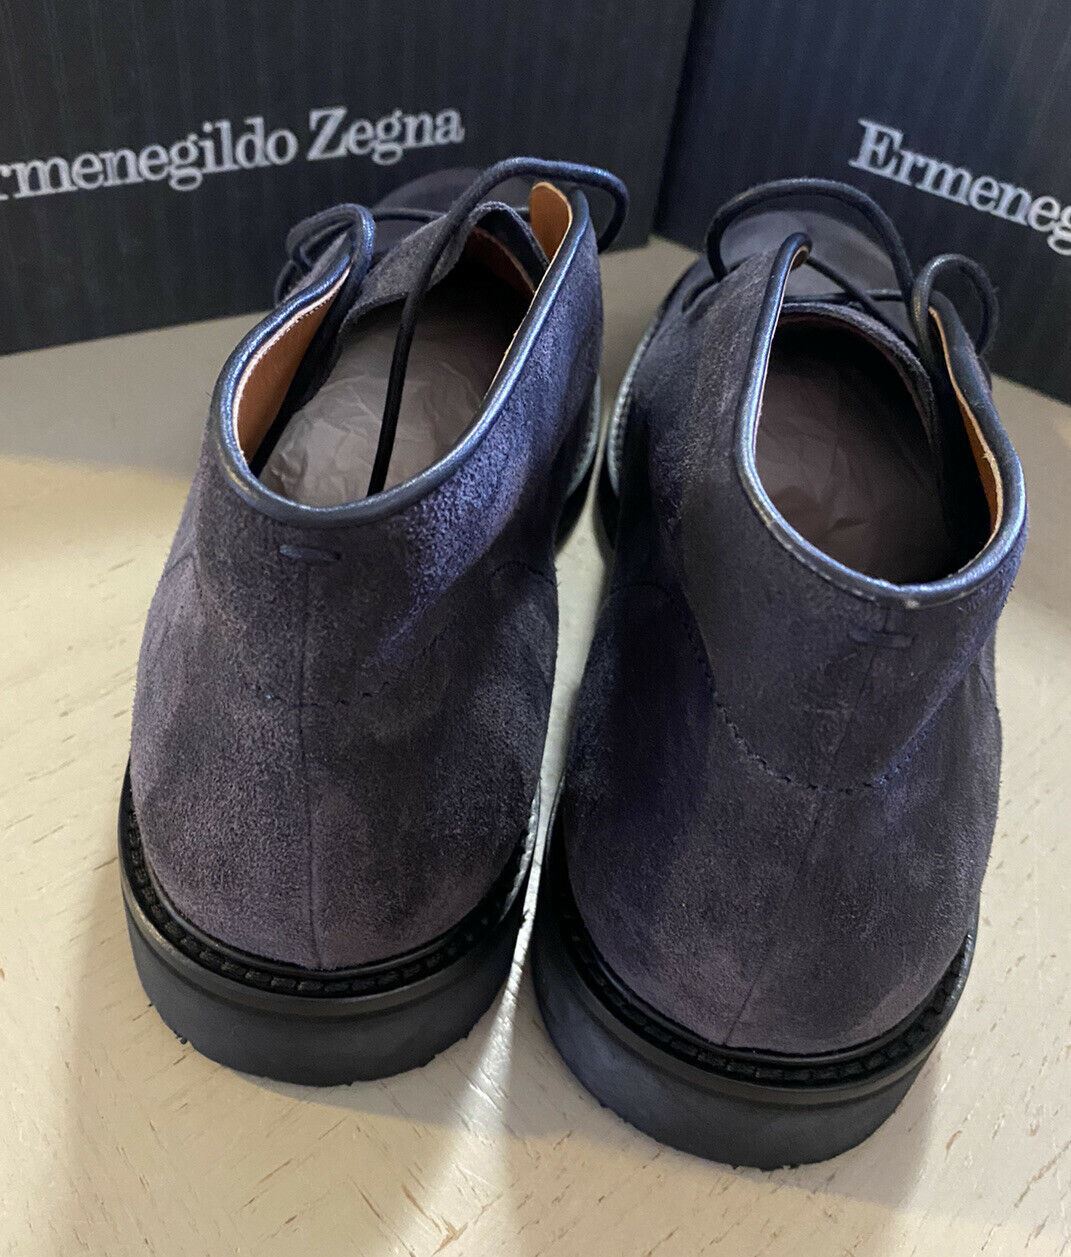 New $650 Ermenegildo Zegna Suede/Leather Boots Shoes Navy/Blue 11 US Italy